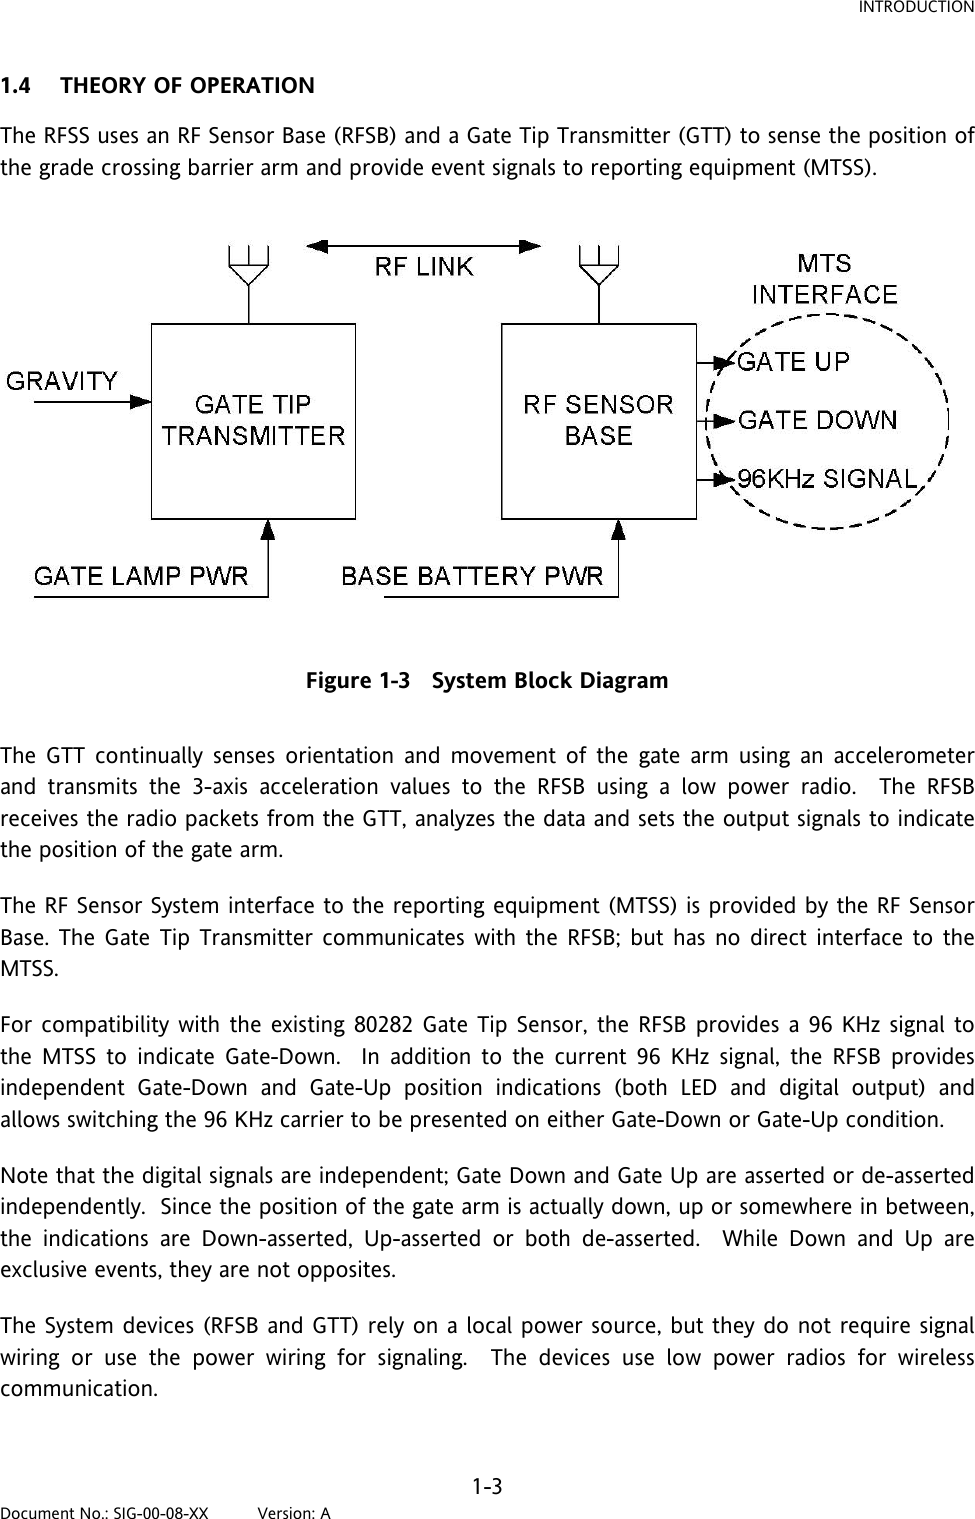 INTRODUCTION 1.4 THEORY OF OPERATION The RFSS uses an RF Sensor Base (RFSB) and a Gate Tip Transmitter (GTT) to sense the position of the grade crossing barrier arm and provide event signals to reporting equipment (MTSS).     Figure 1-3   System Block Diagram  The GTT continually senses orientation and movement of the gate arm using an accelerometer and transmits the 3-axis acceleration values to the RFSB using a low power radio.  The RFSB receives the radio packets from the GTT, analyzes the data and sets the output signals to indicate the position of the gate arm.  The RF Sensor System interface to the reporting equipment (MTSS) is provided by the RF Sensor Base. The Gate Tip Transmitter communicates with the RFSB; but has no direct interface to the MTSS.  For compatibility with the existing 80282 Gate Tip Sensor, the RFSB provides a 96 KHz signal to the MTSS to indicate Gate-Down.  In addition to the current 96 KHz signal, the RFSB provides independent Gate-Down and Gate-Up position indications (both LED and digital output) and allows switching the 96 KHz carrier to be presented on either Gate-Down or Gate-Up condition.  Note that the digital signals are independent; Gate Down and Gate Up are asserted or de-asserted independently.  Since the position of the gate arm is actually down, up or somewhere in between, the indications are Down-asserted, Up-asserted or both de-asserted.  While Down and Up are exclusive events, they are not opposites.  The System devices (RFSB and GTT) rely on a local power source, but they do not require signal wiring or use the power wiring for signaling.  The devices use low power radios for wireless communication.   1-3 Document No.: SIG-00-08-XX          Version: A 